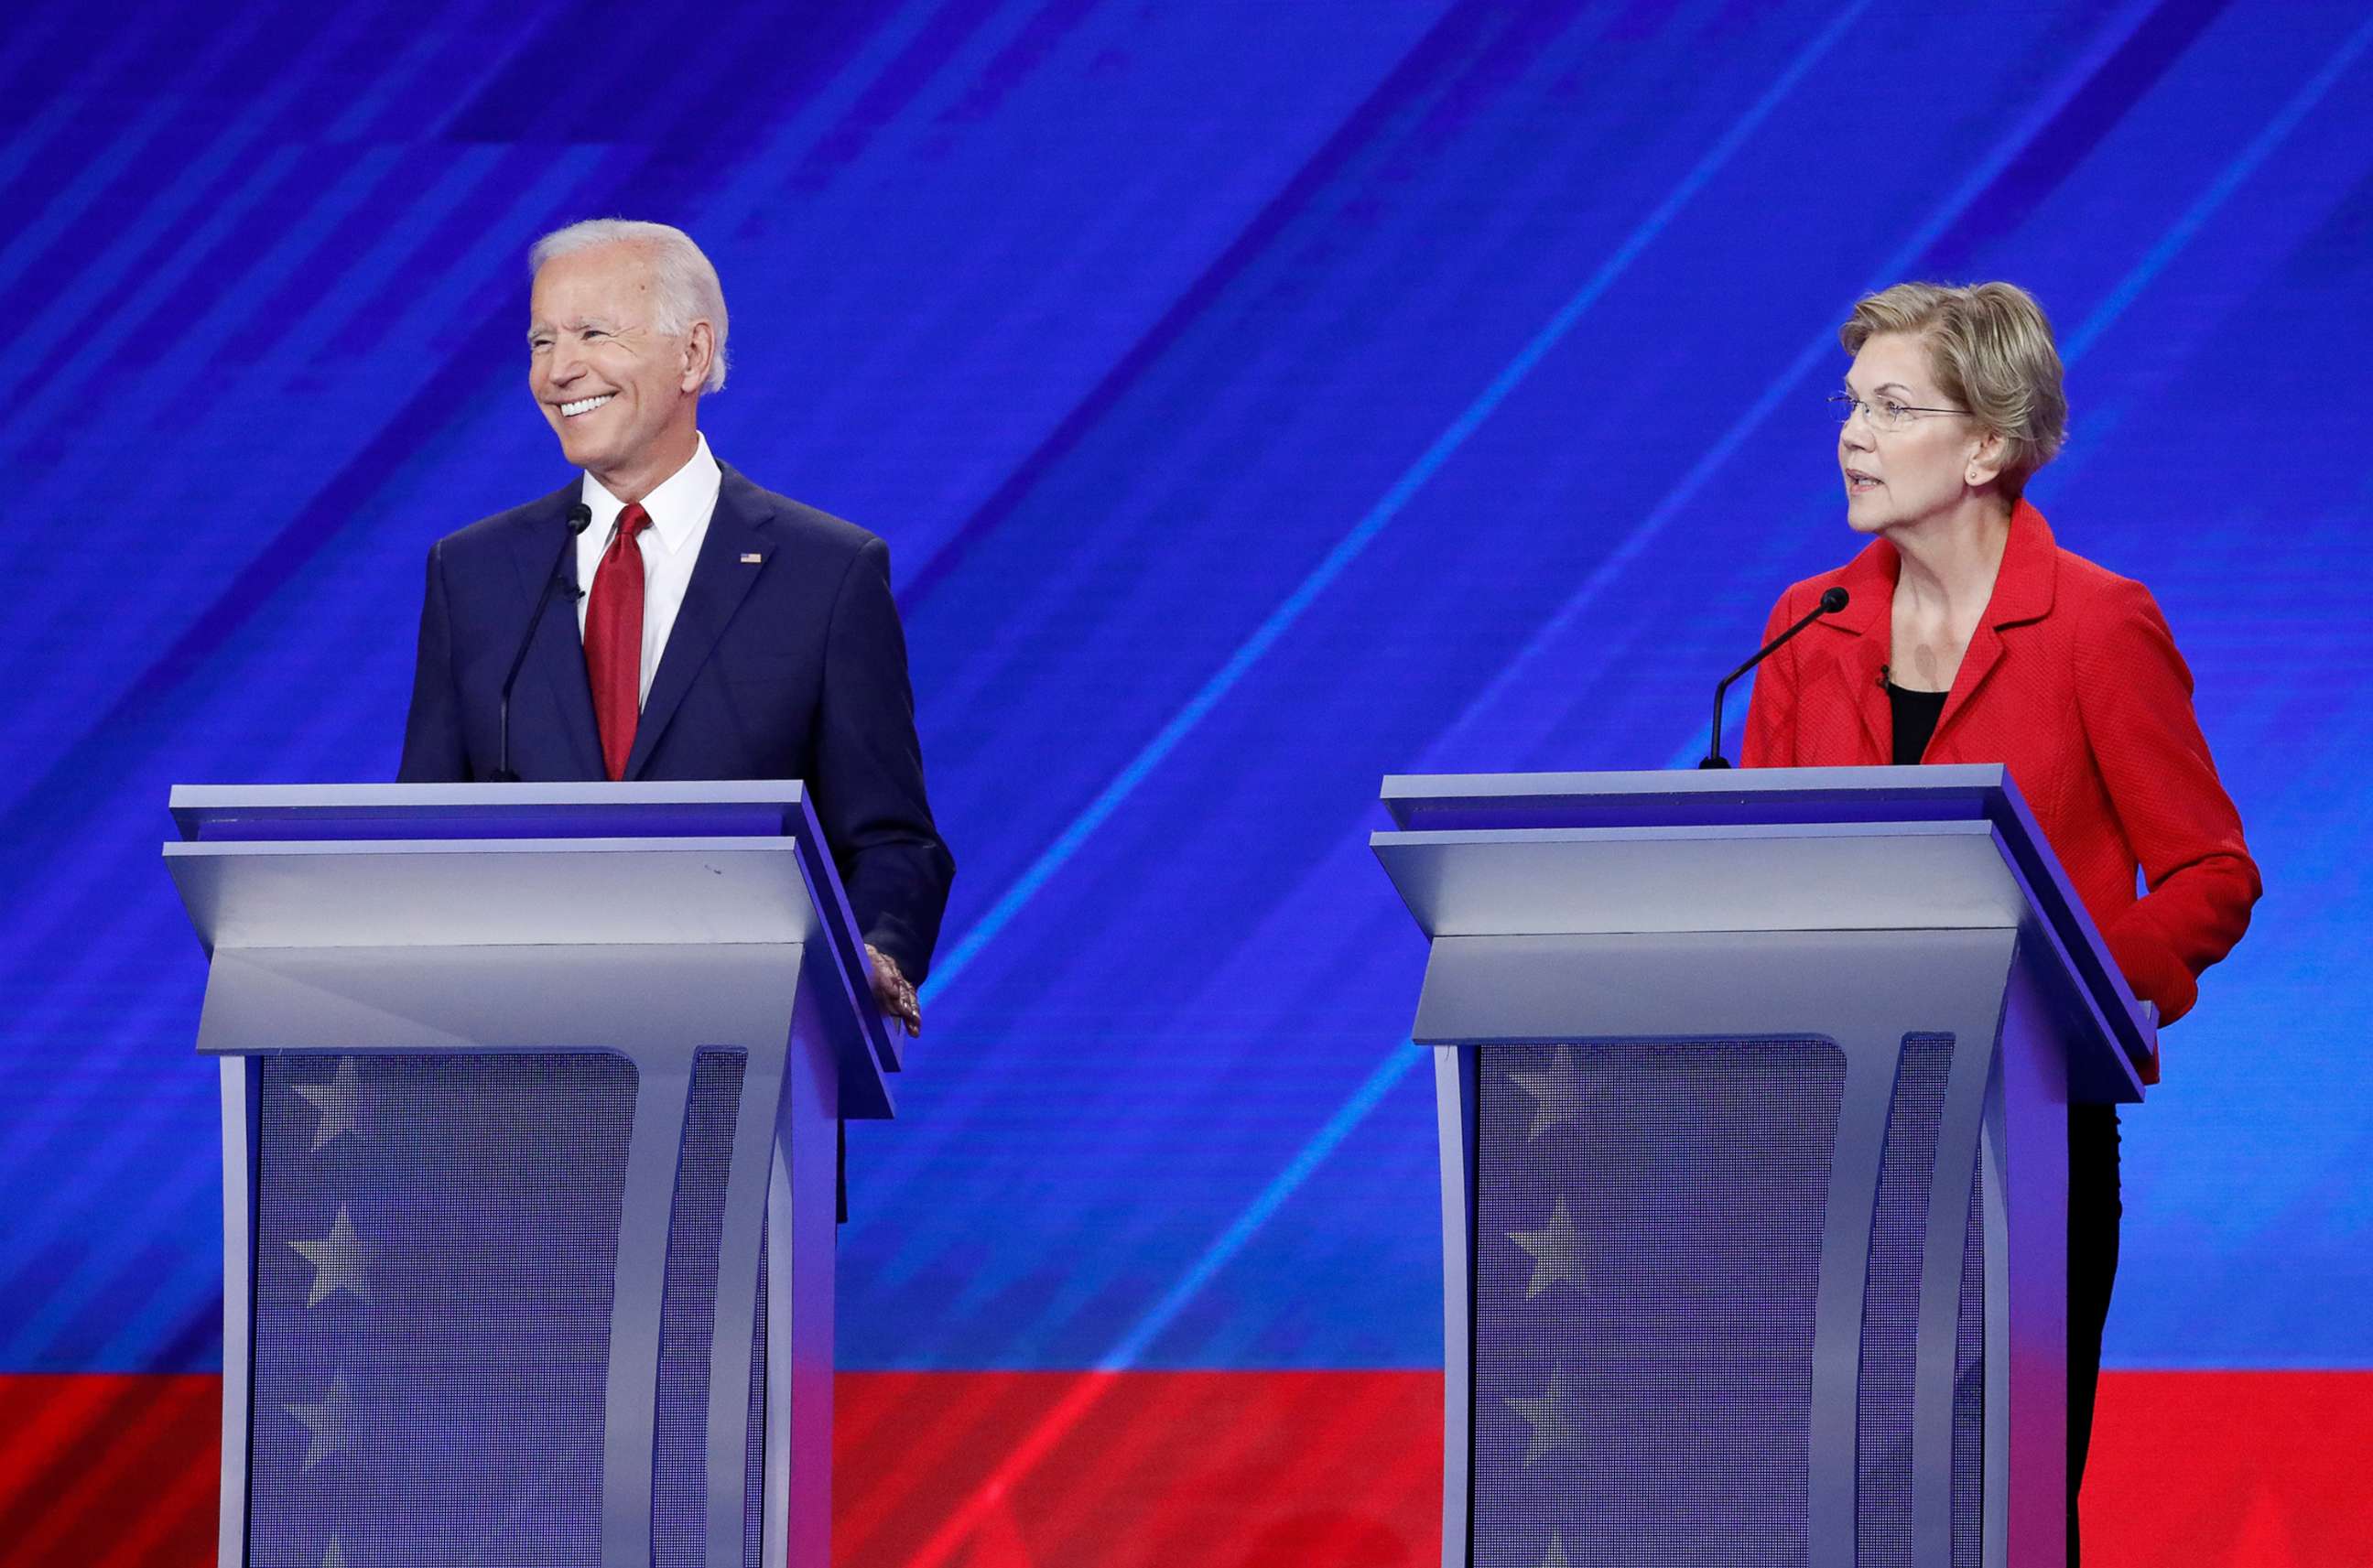 PHOTO: Democratic presidential hopefuls Joe Biden and Elizabeth Warren participate in the third Democratic primary debate hosted by ABC News in partnership with Univision at Texas Southern University in Houston, Texas, Sept. 12, 2019.